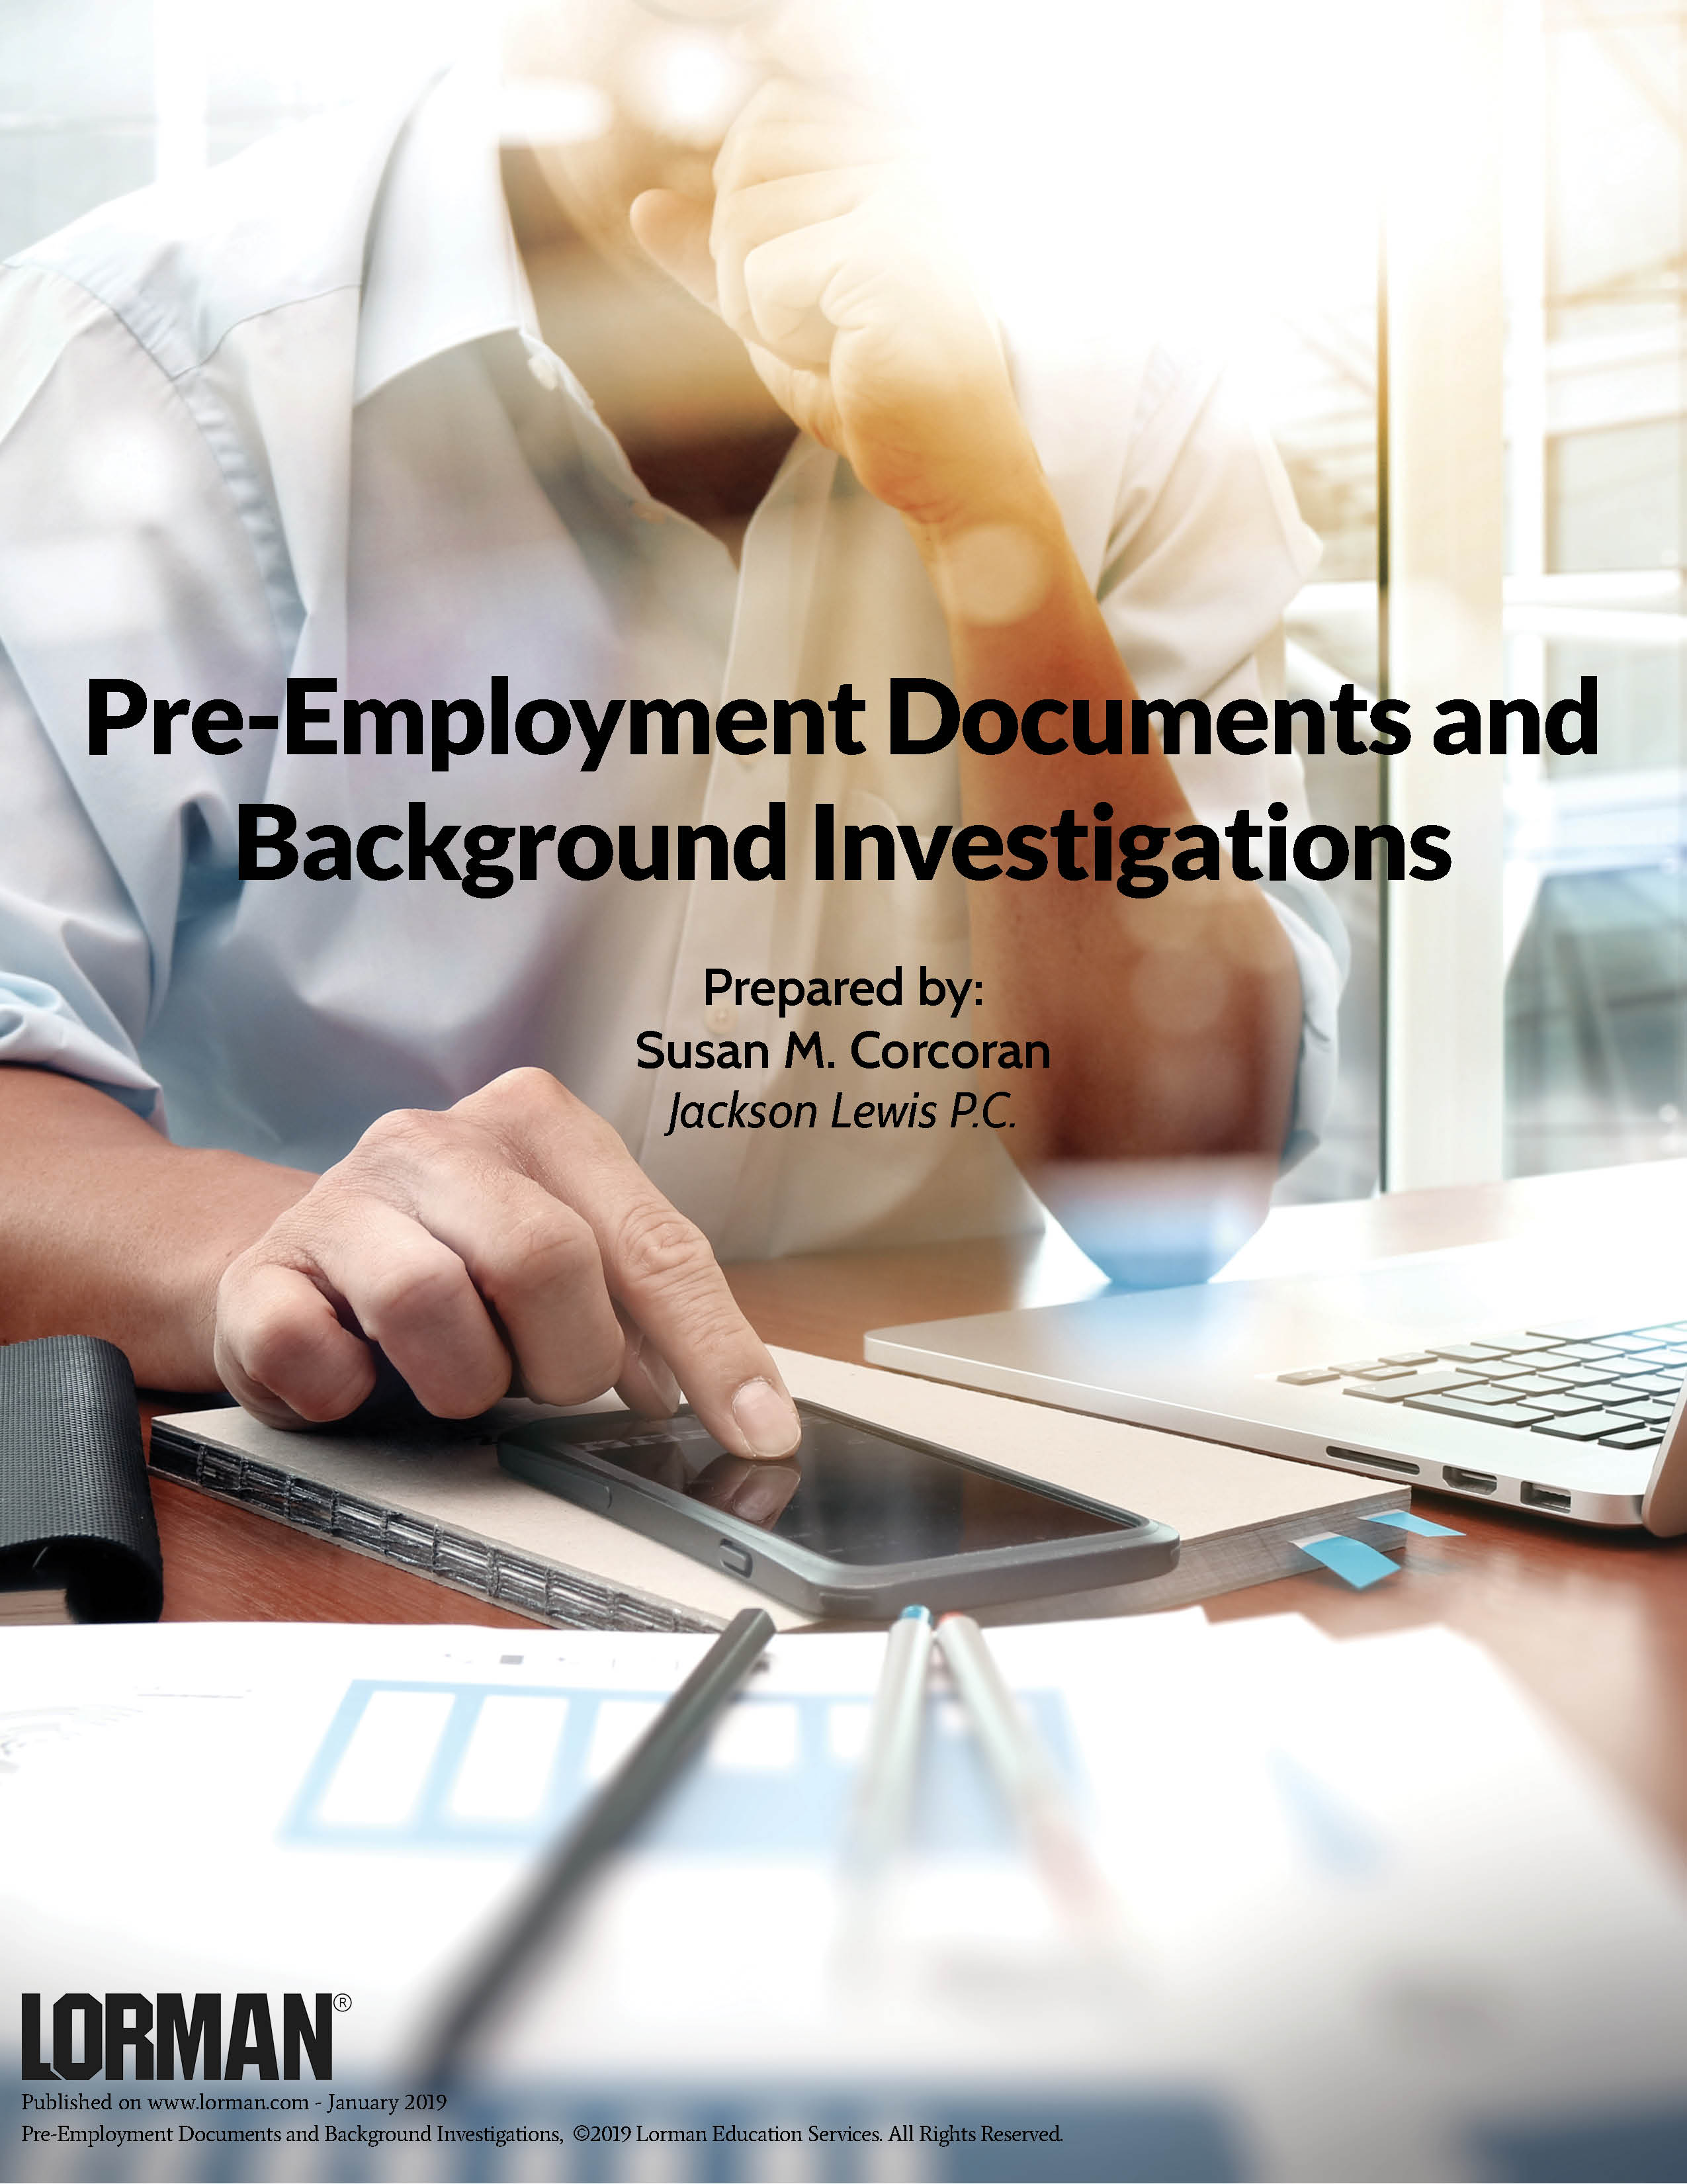 Pre-Employment Documents and Background Investigations